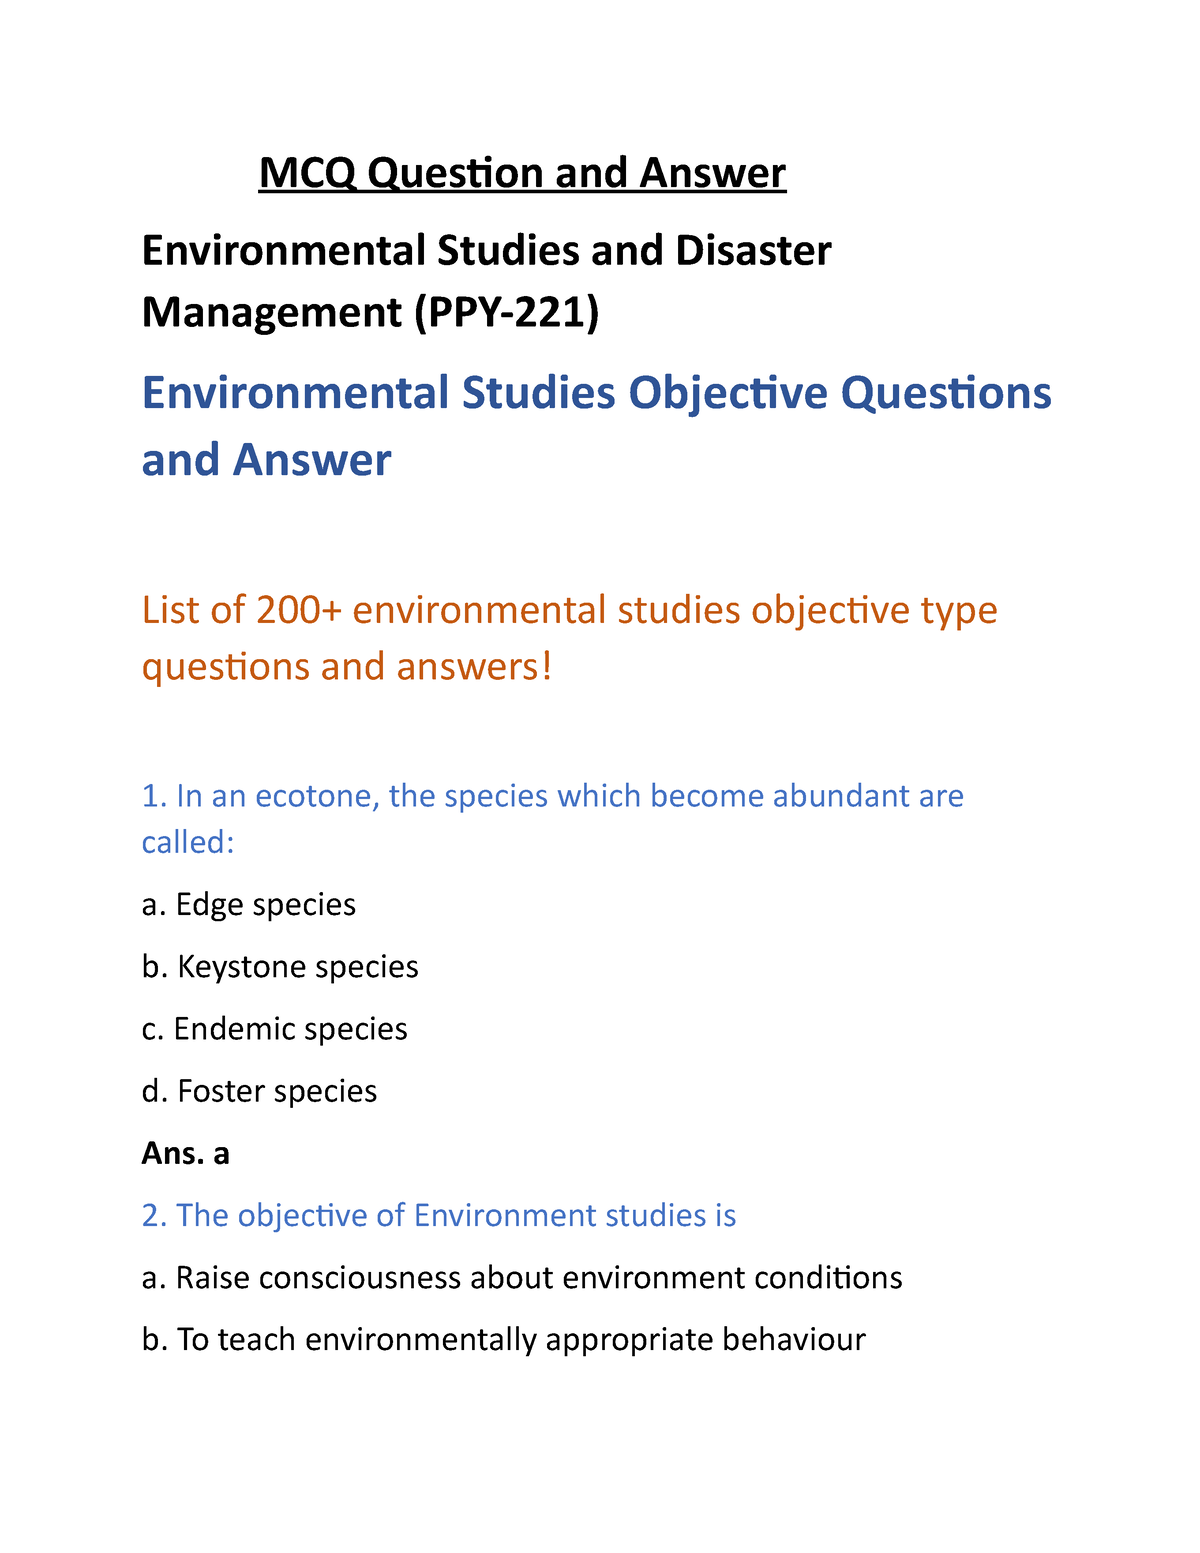 research questions on environmental awareness